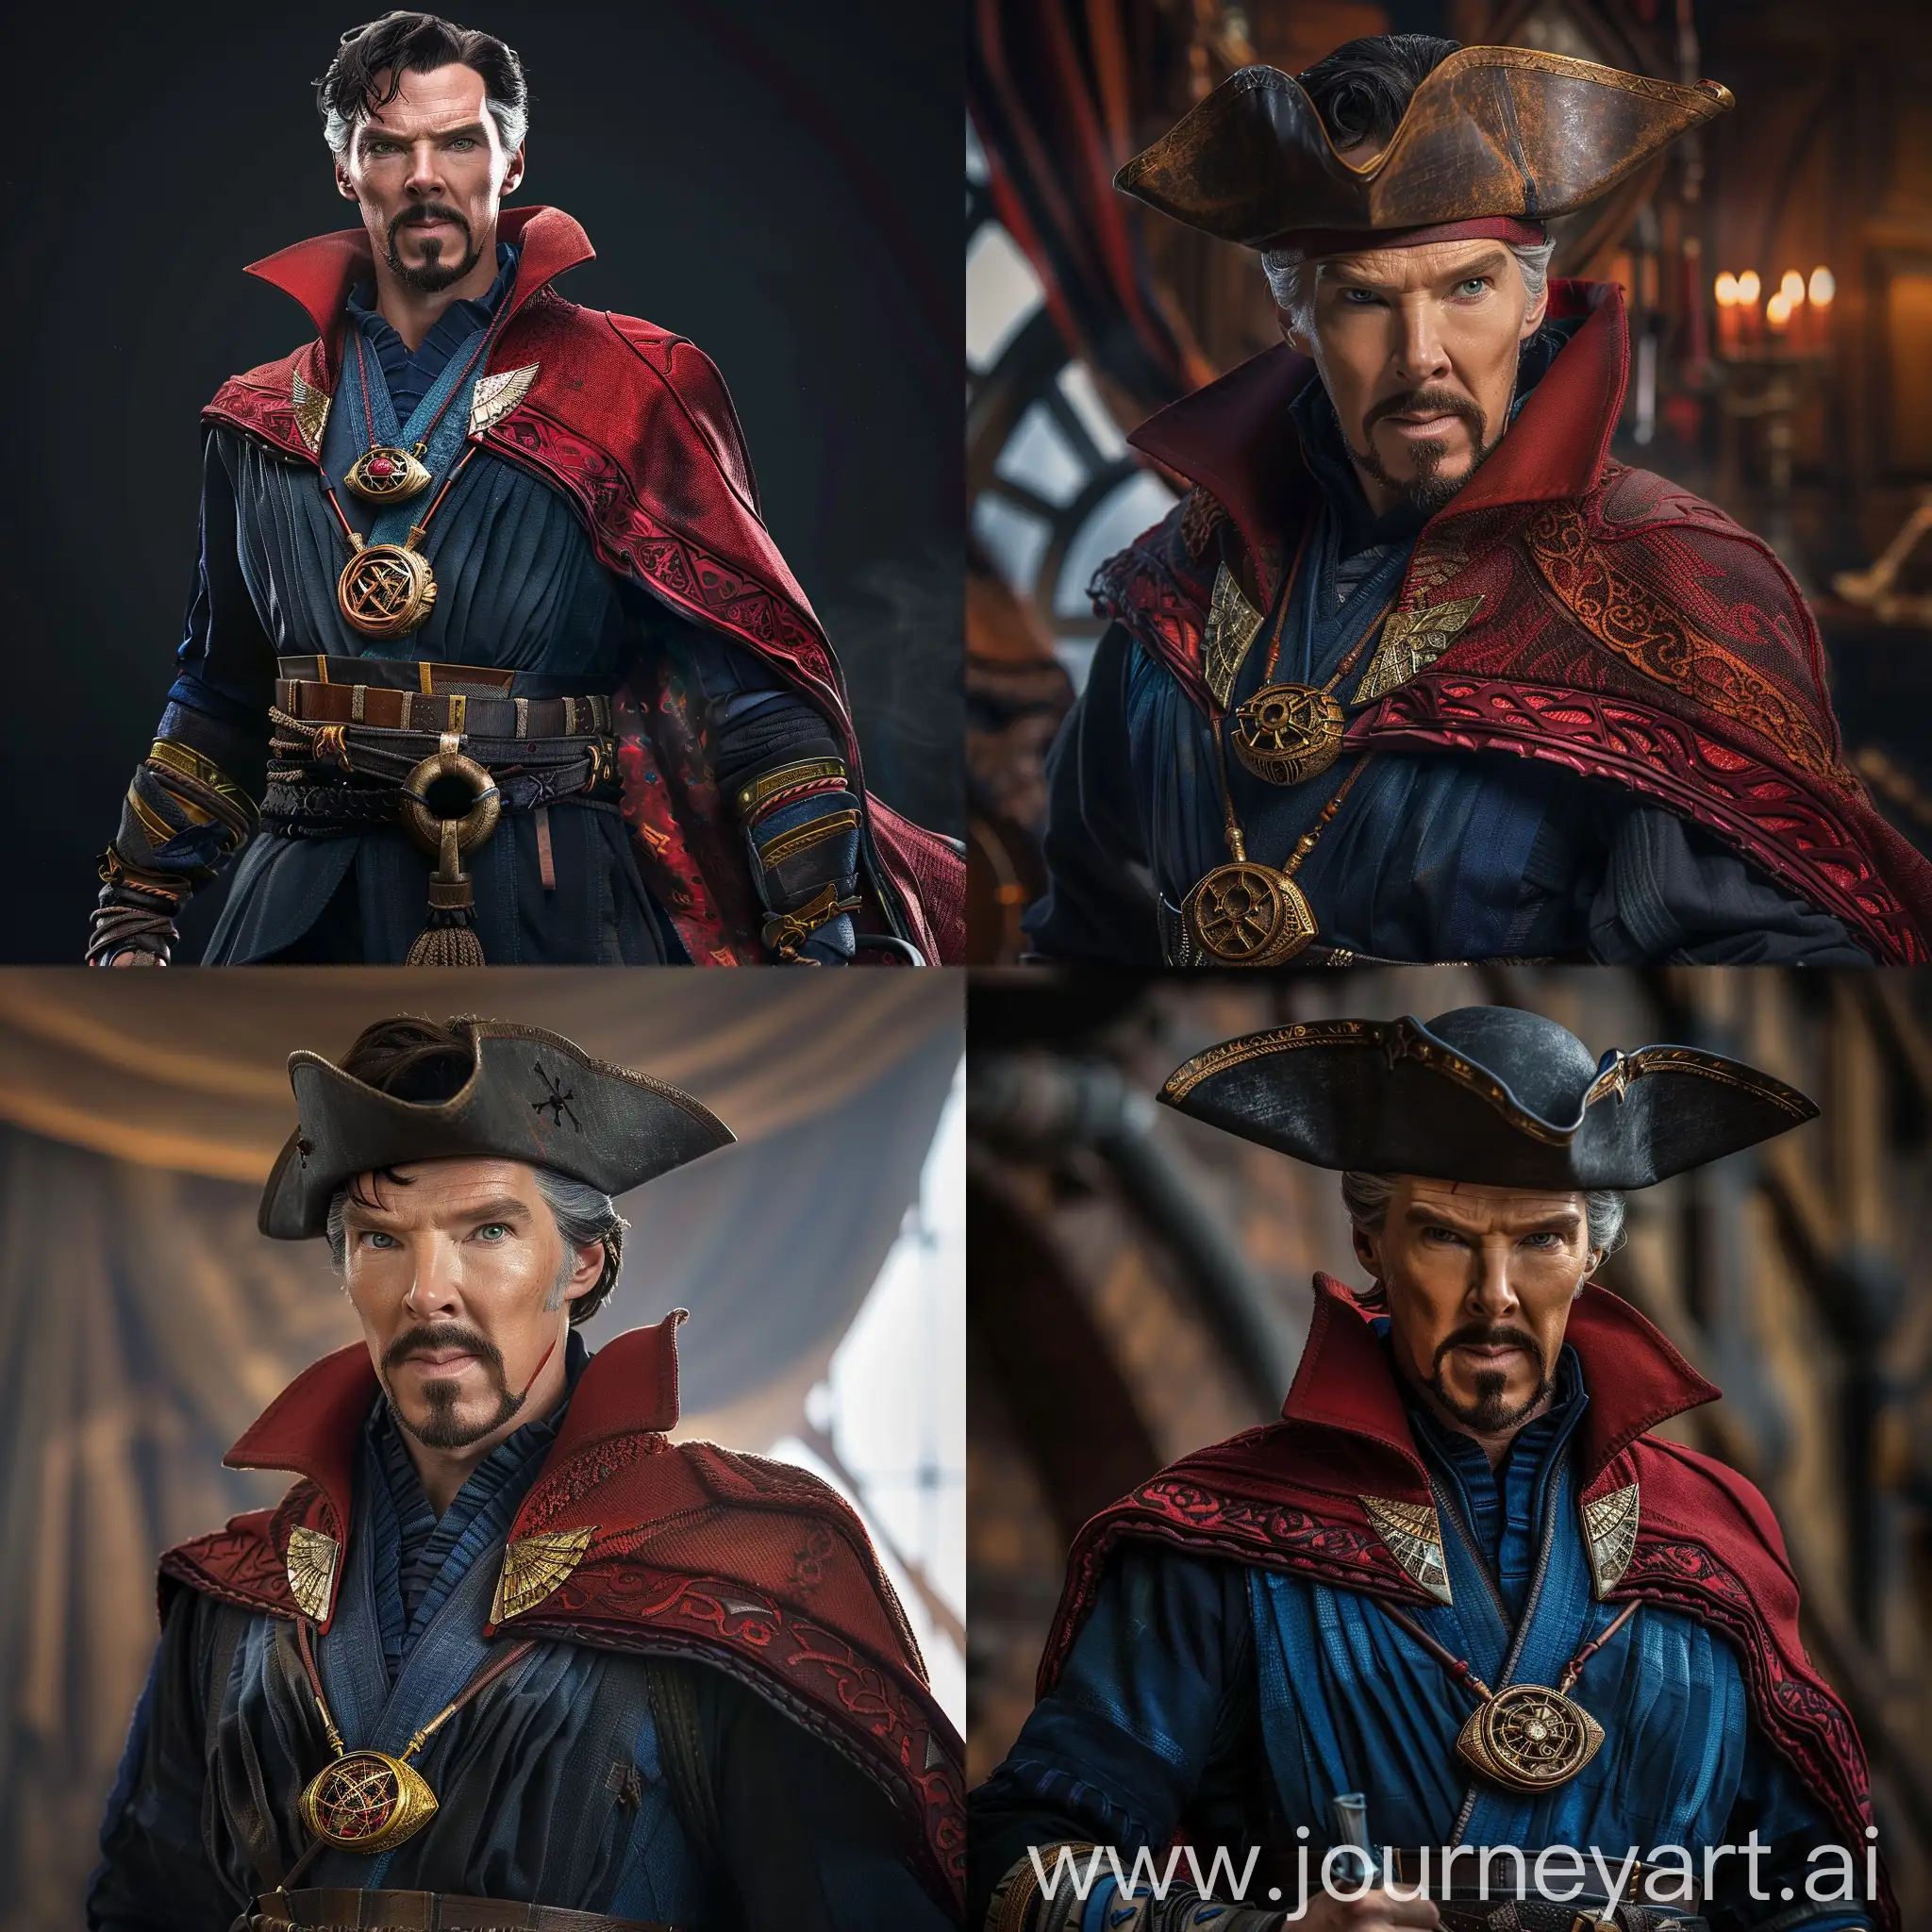 Doctor Strange, in pirate outfit